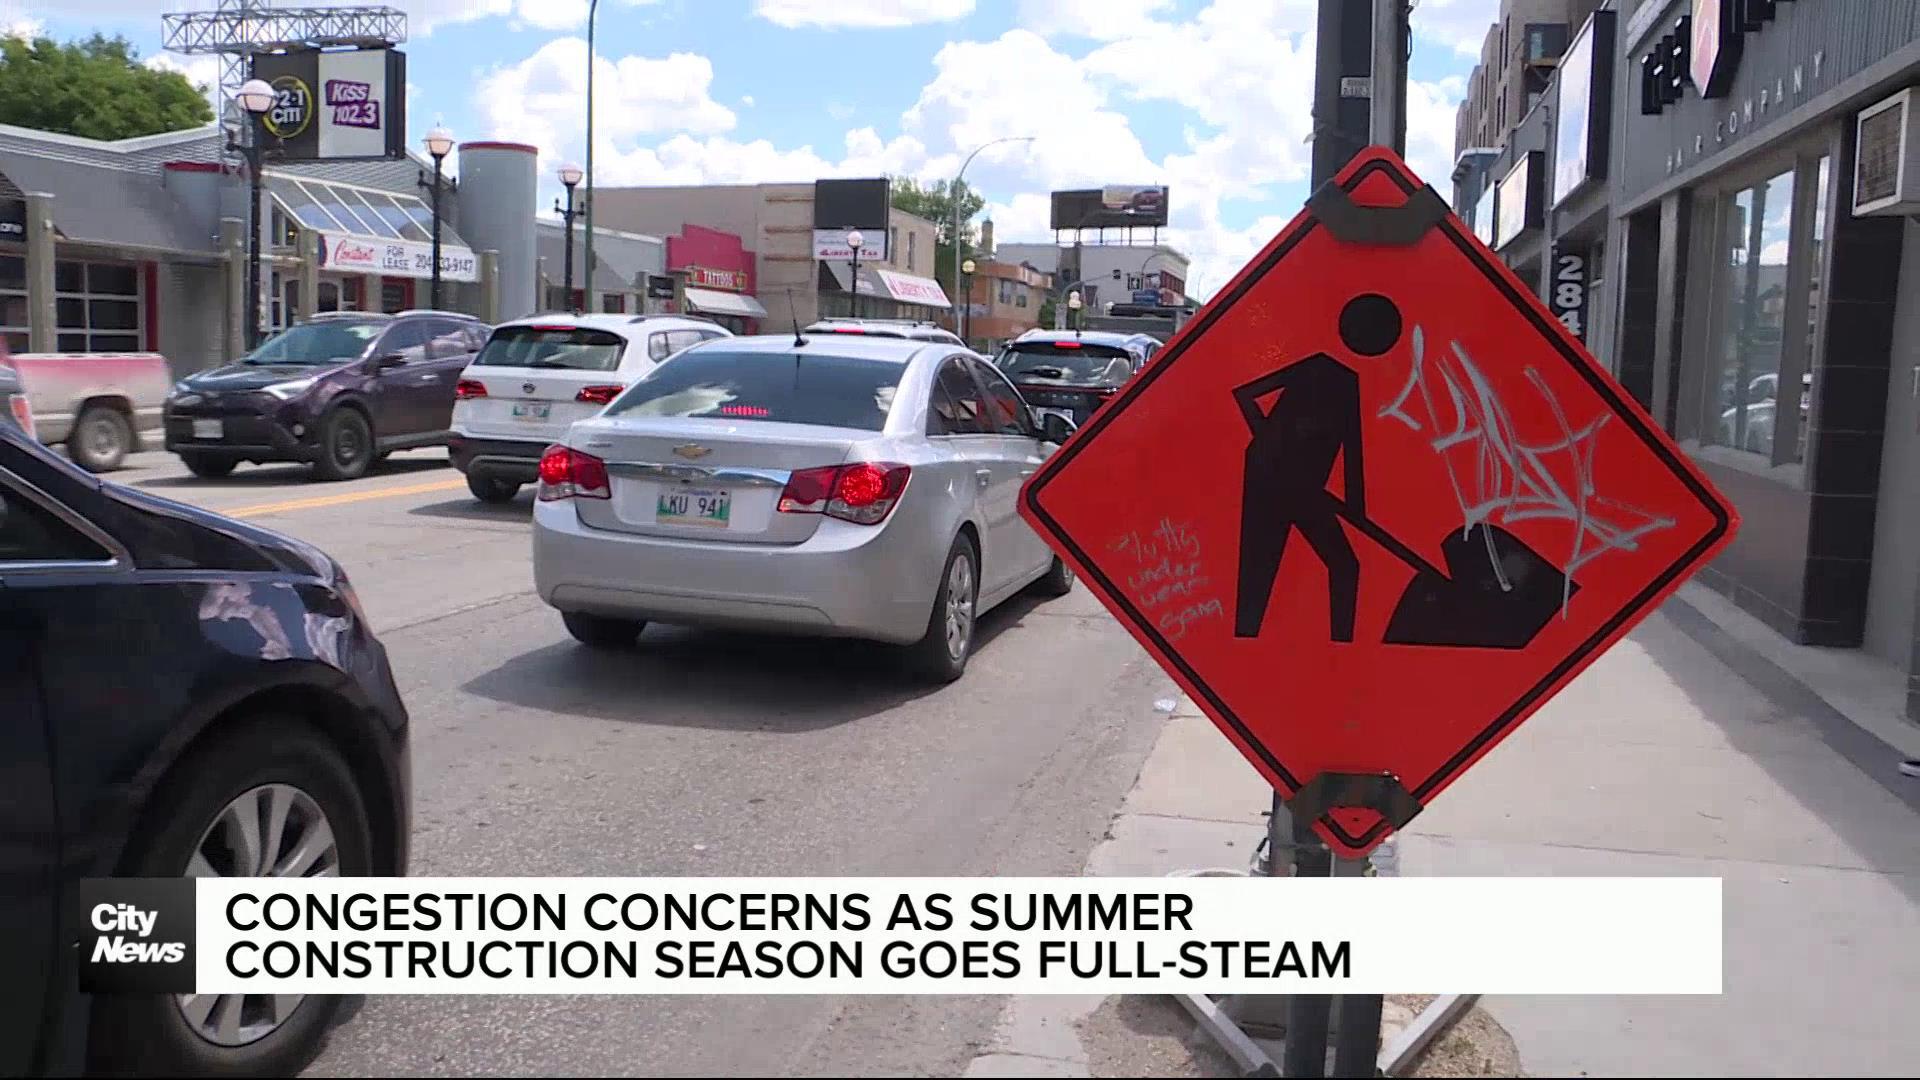 With road construction comes congestion concerns in Winnipeg